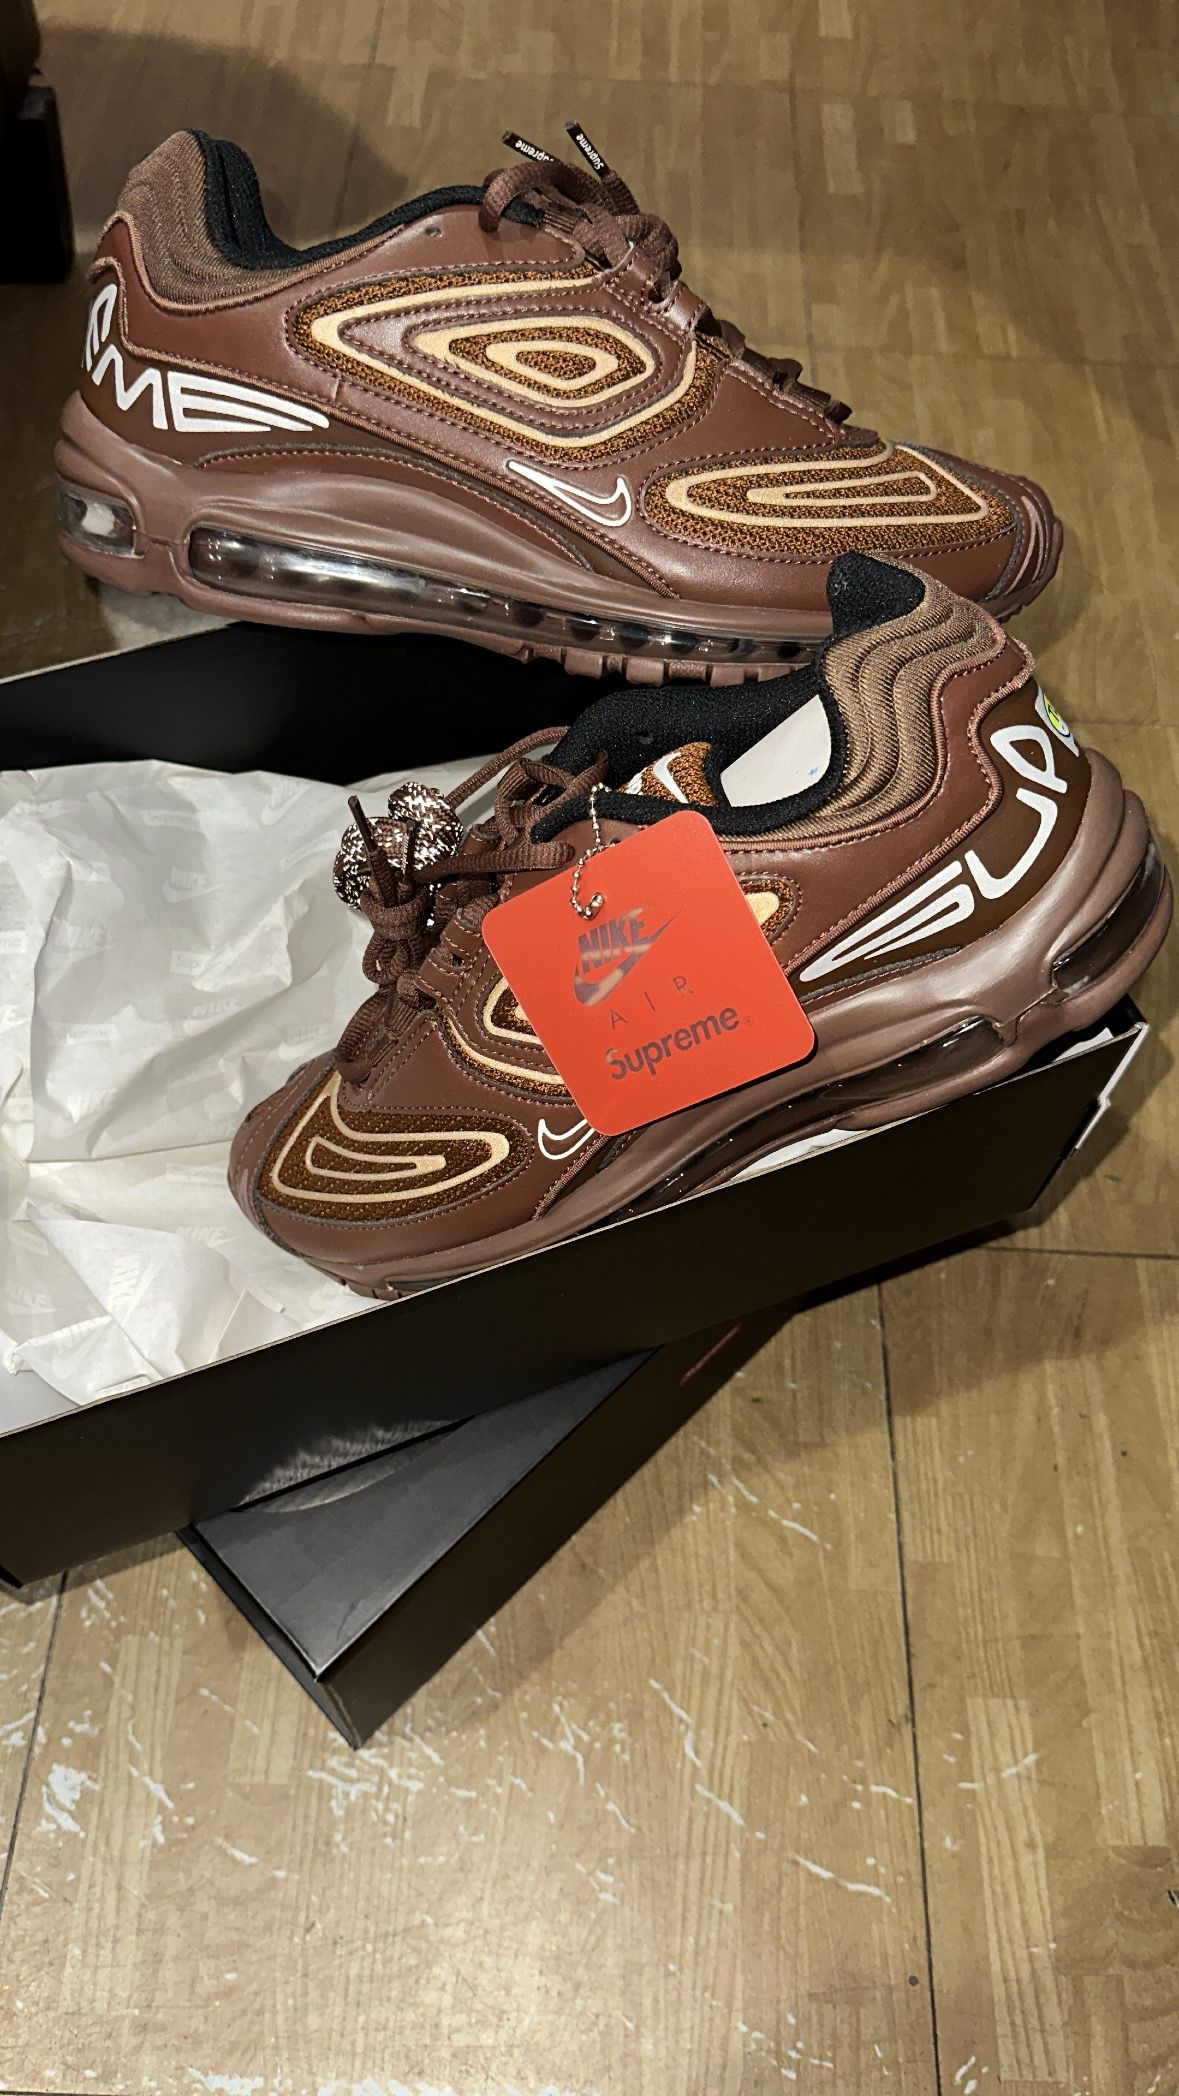 Nike Supreme Air Max 98 TL Brown for Sale in Brooklyn, NY - OfferUp